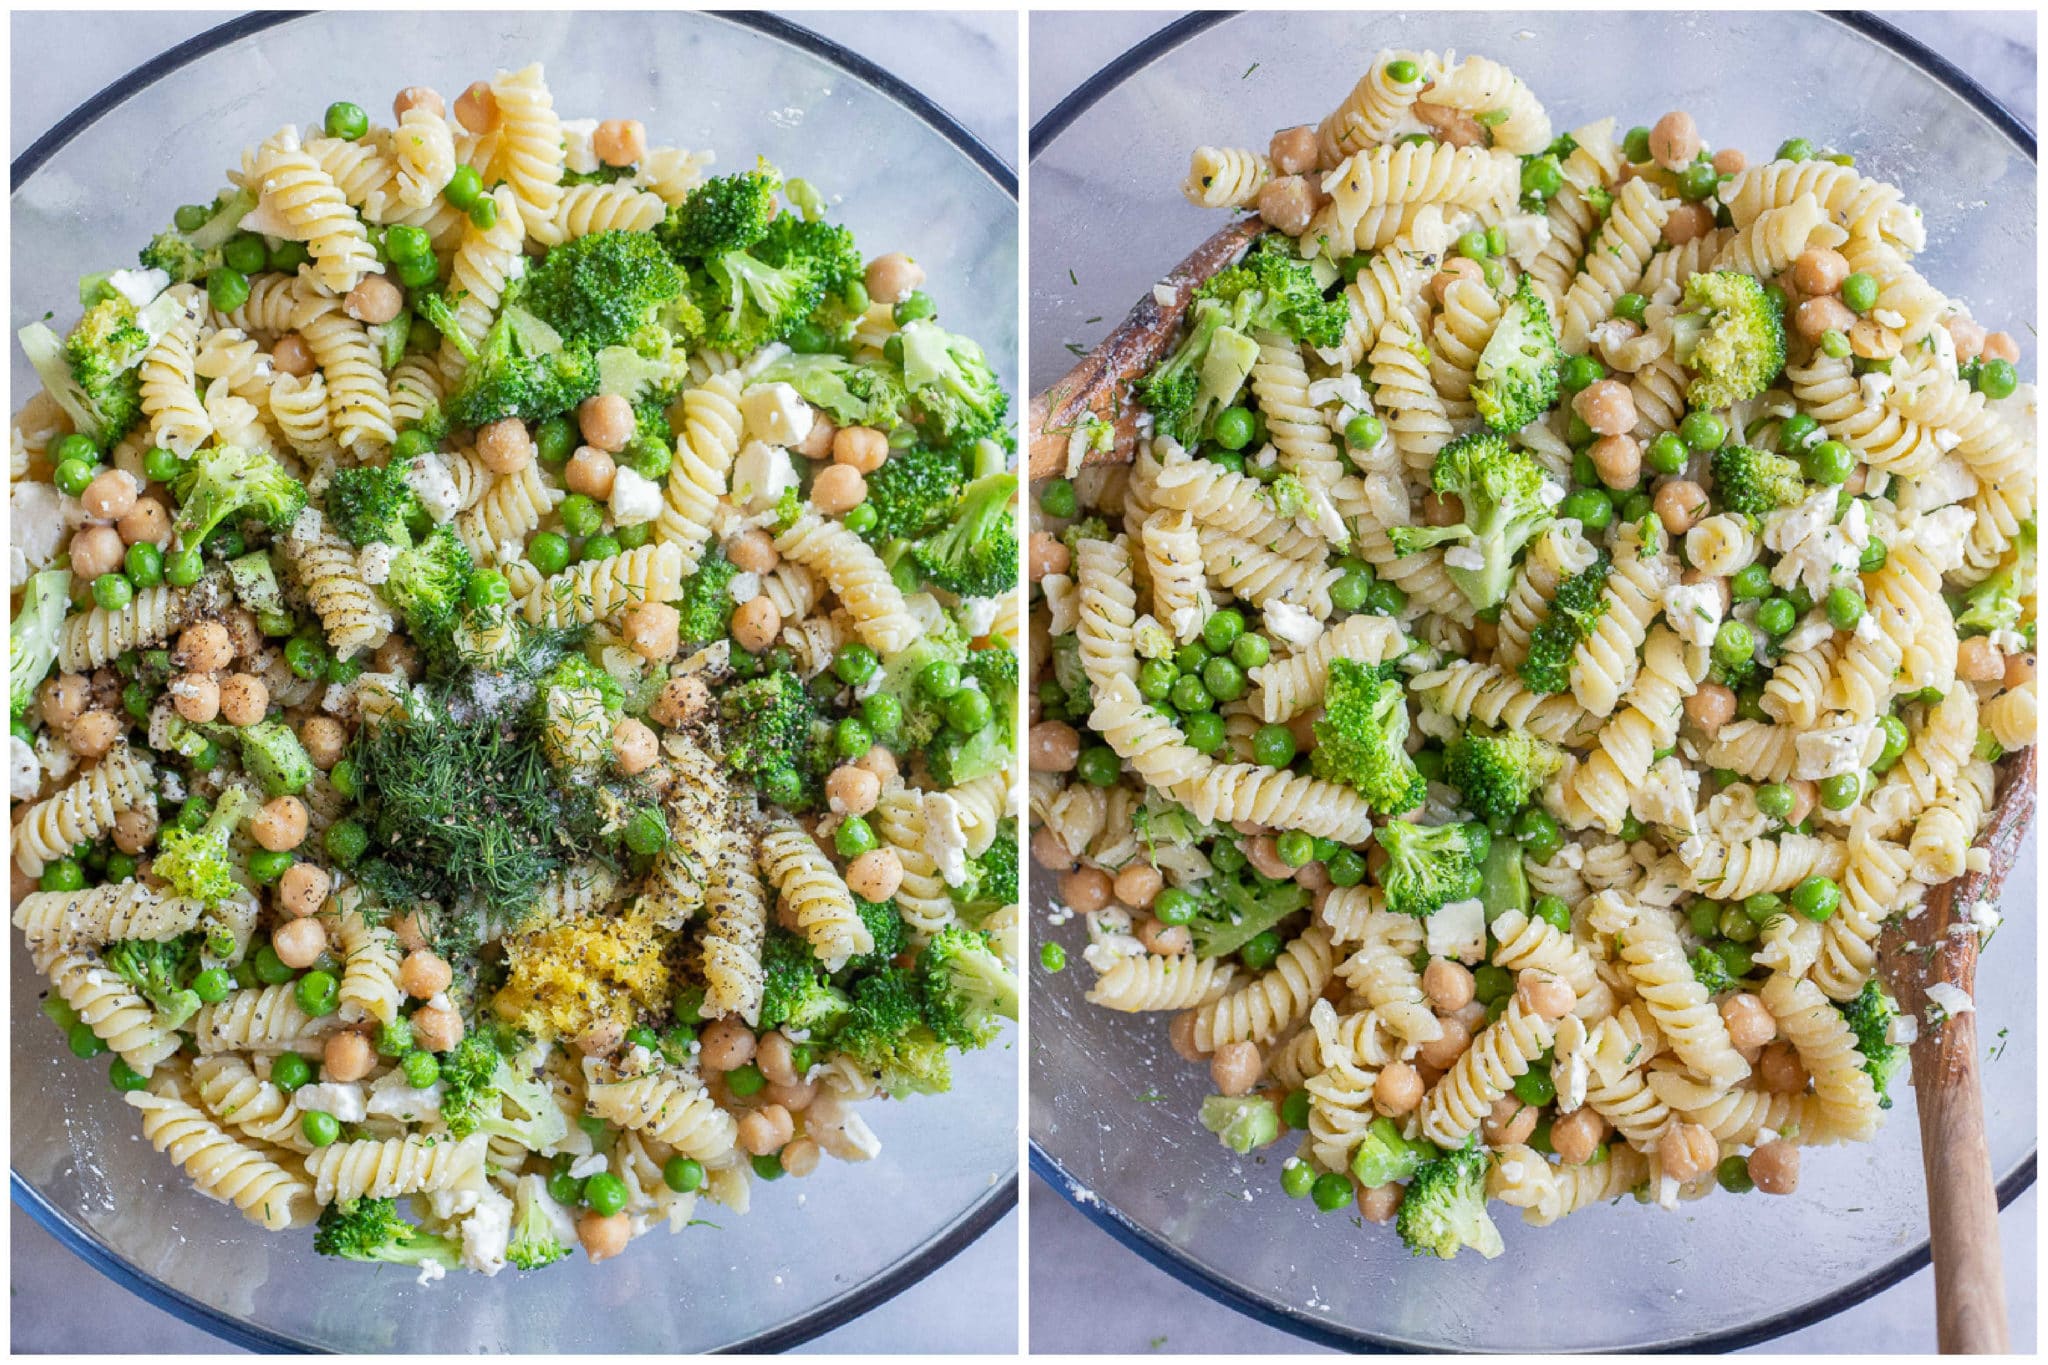 lemon dill pasta salad before and after it has been mixed up